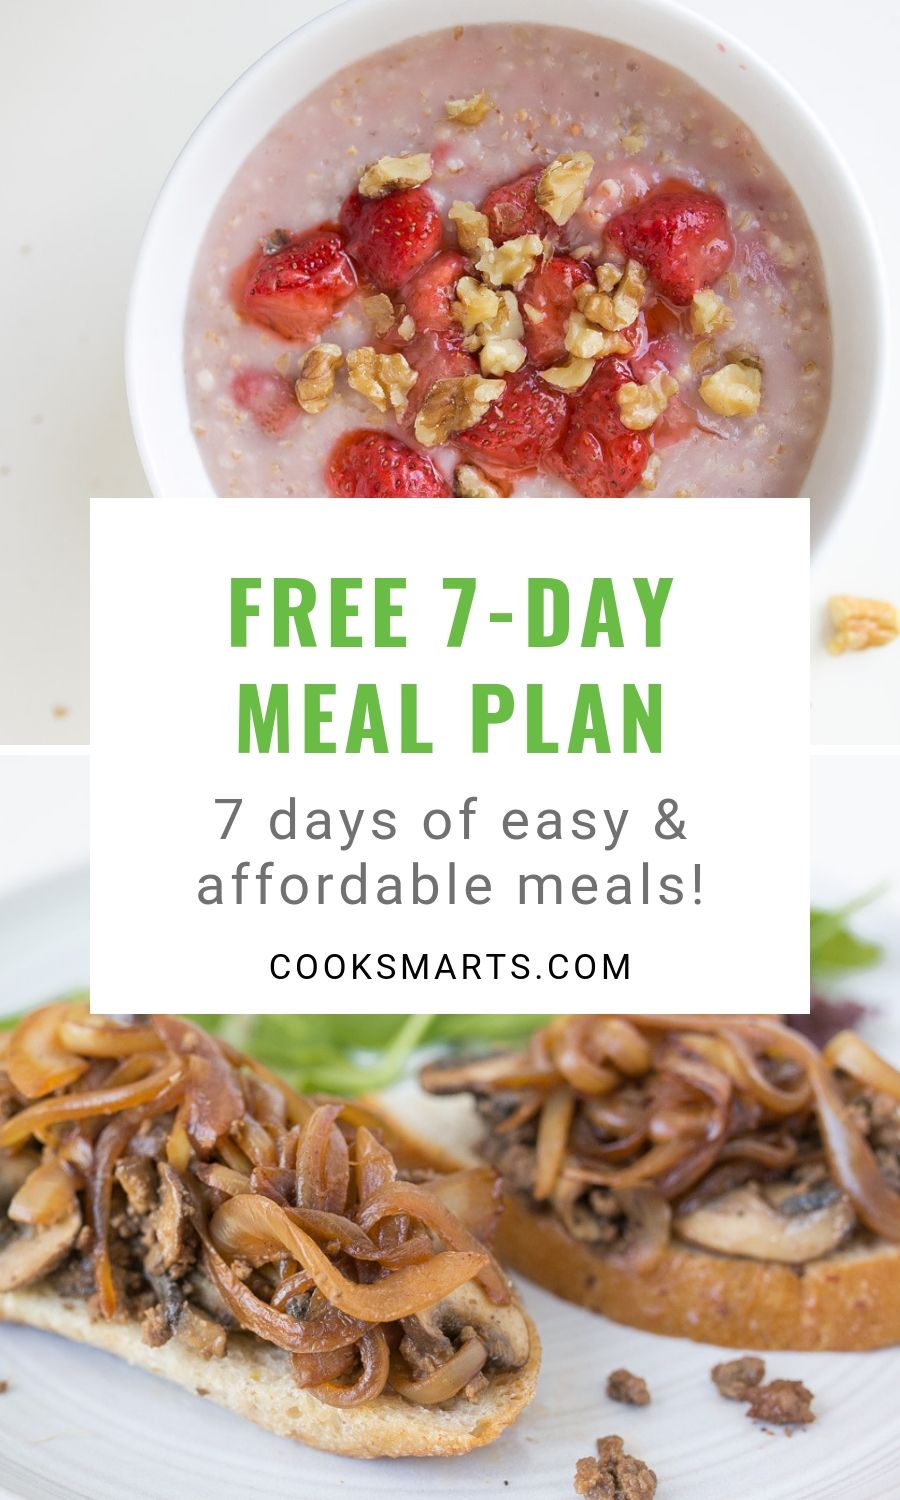 7 Day Meal Plan with Breakfasts, Lunches, and Dinners | Cook Smarts